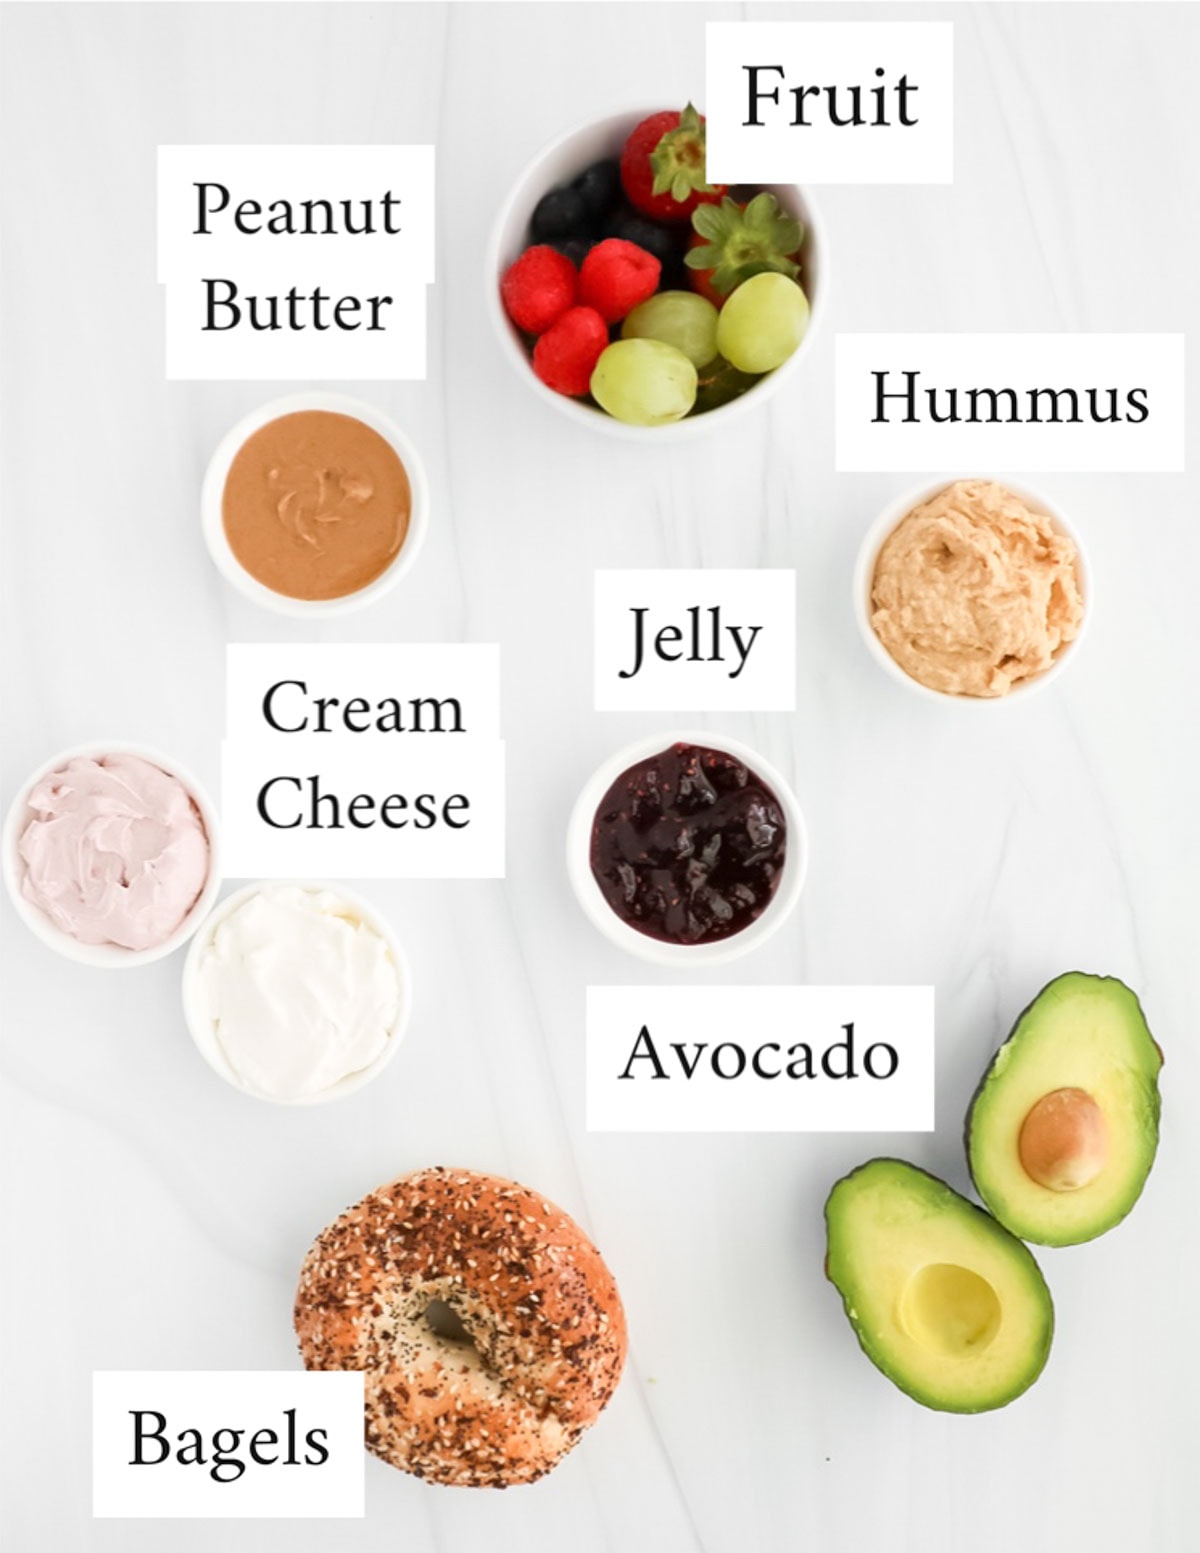 Labeled ingredients including: fruit, peanut butter, hummus, jelly, cream cheese, avocado, and bagels.